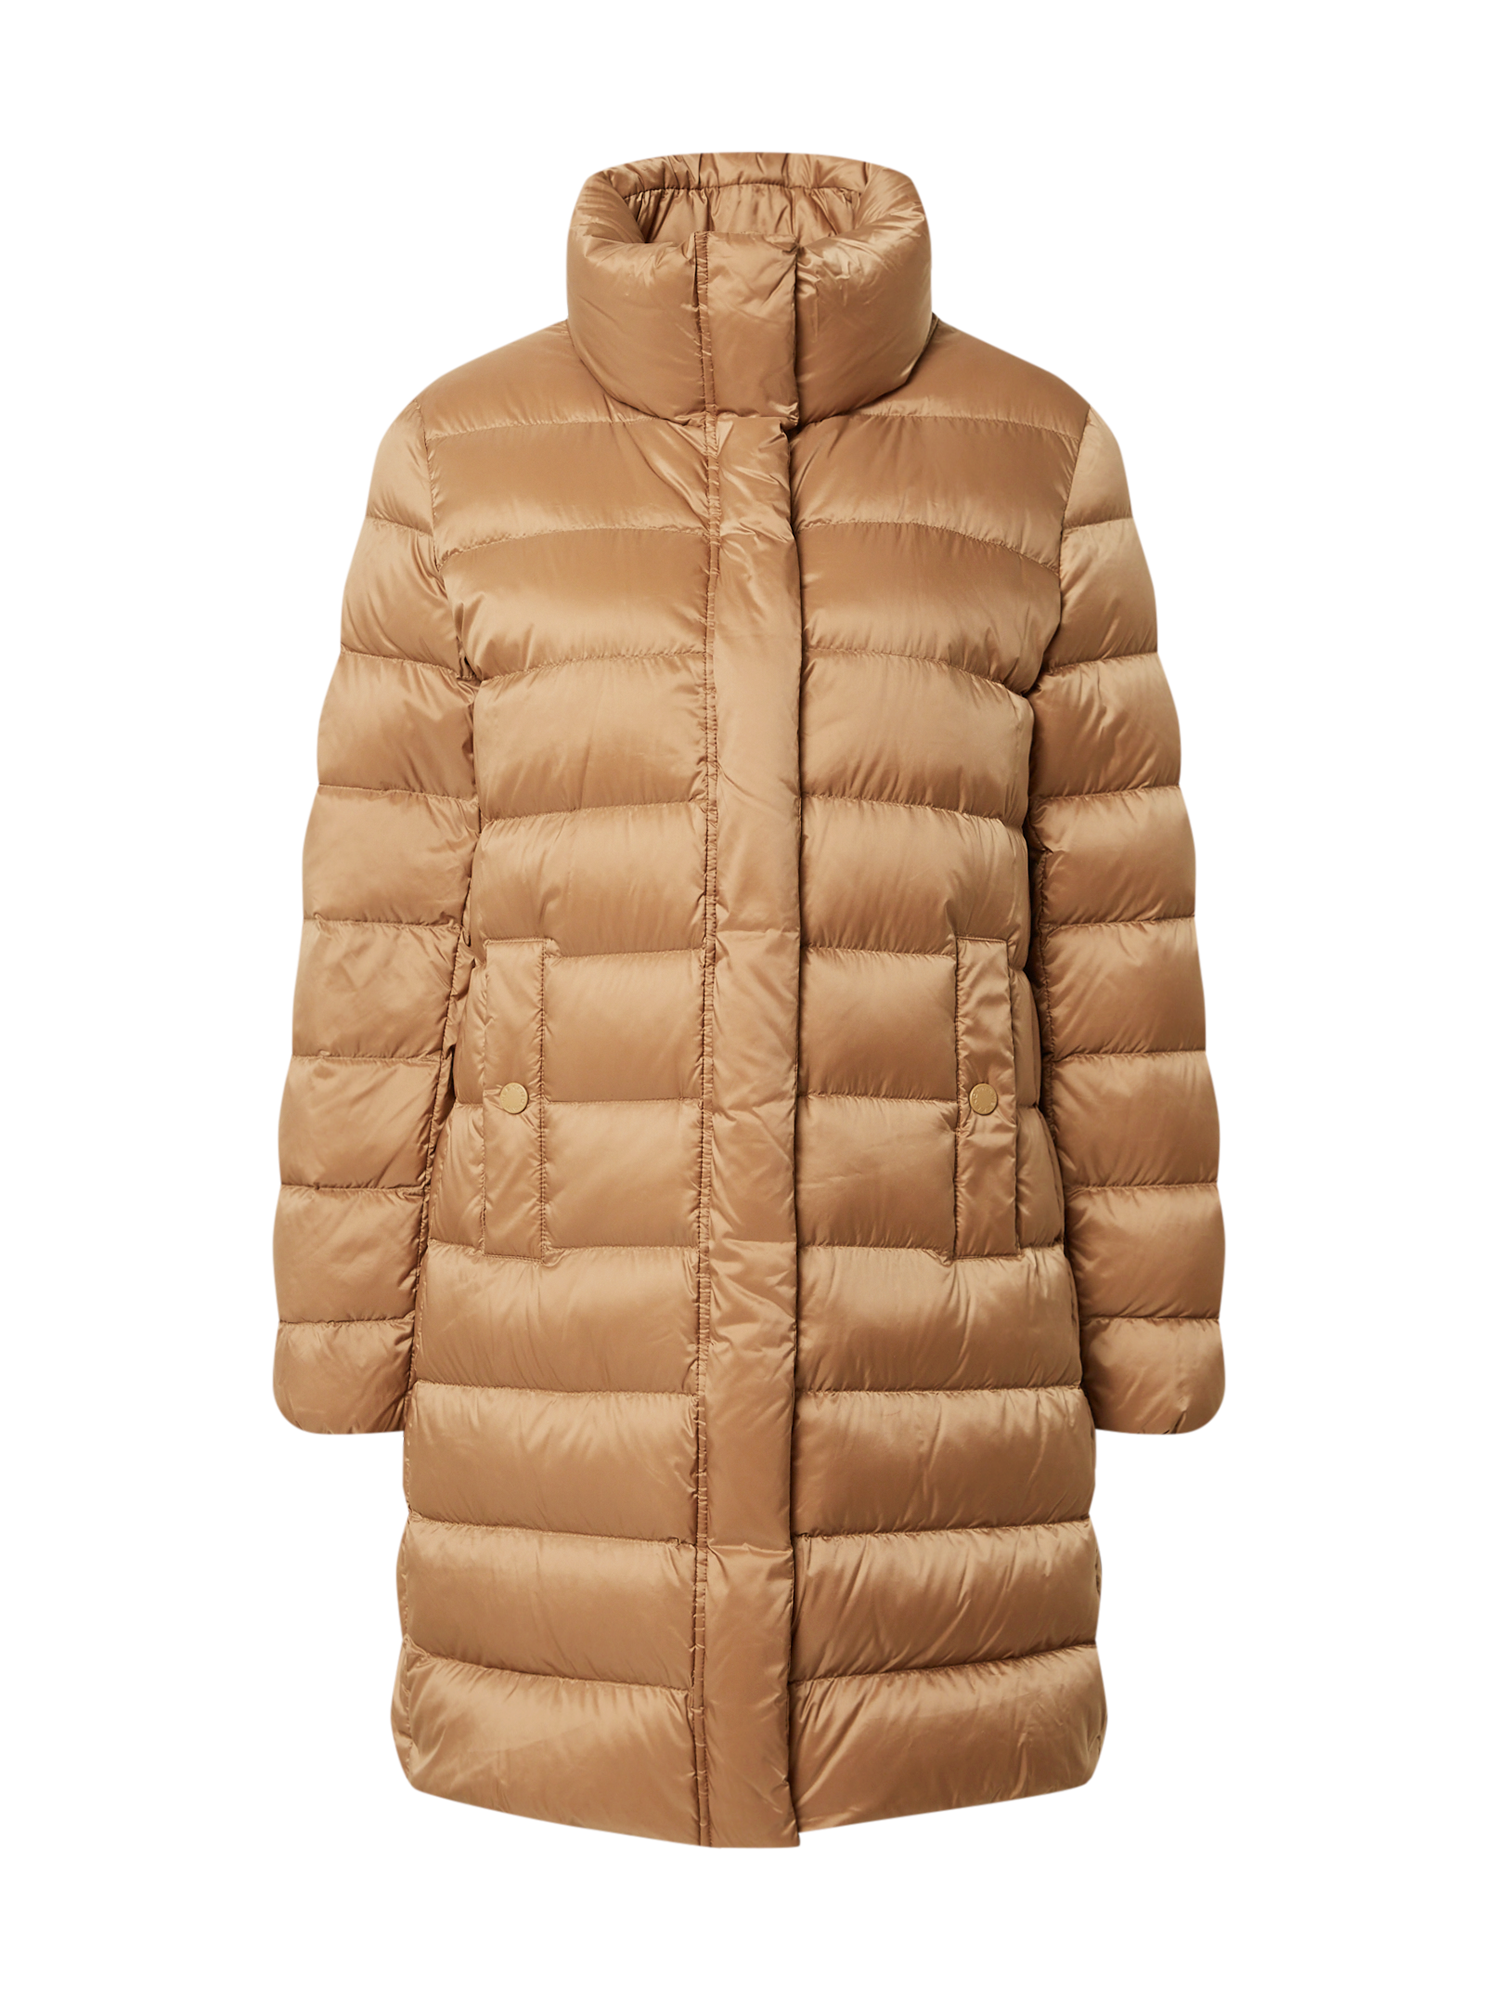 CYZFS Donna Weekend Max Mara Cappotto invernale CAMICE in Beige 